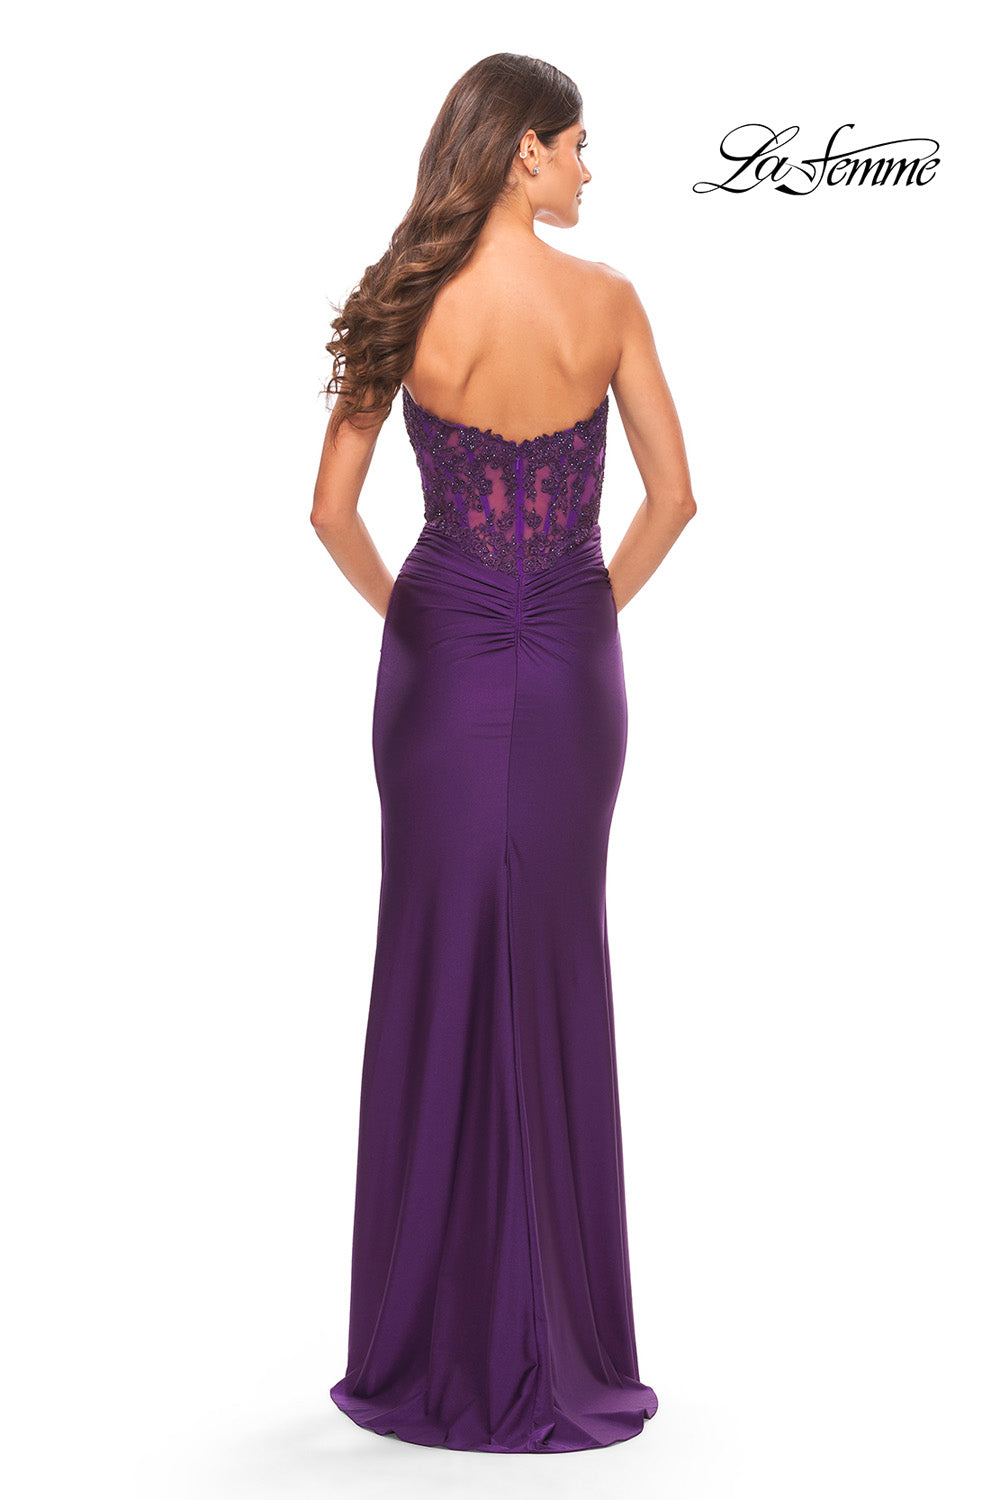 La Femme 31182 prom dress images.  La Femme 31182 is available in these colors: Dark Berry, Dark Emerald, Navy, Royal Purple.